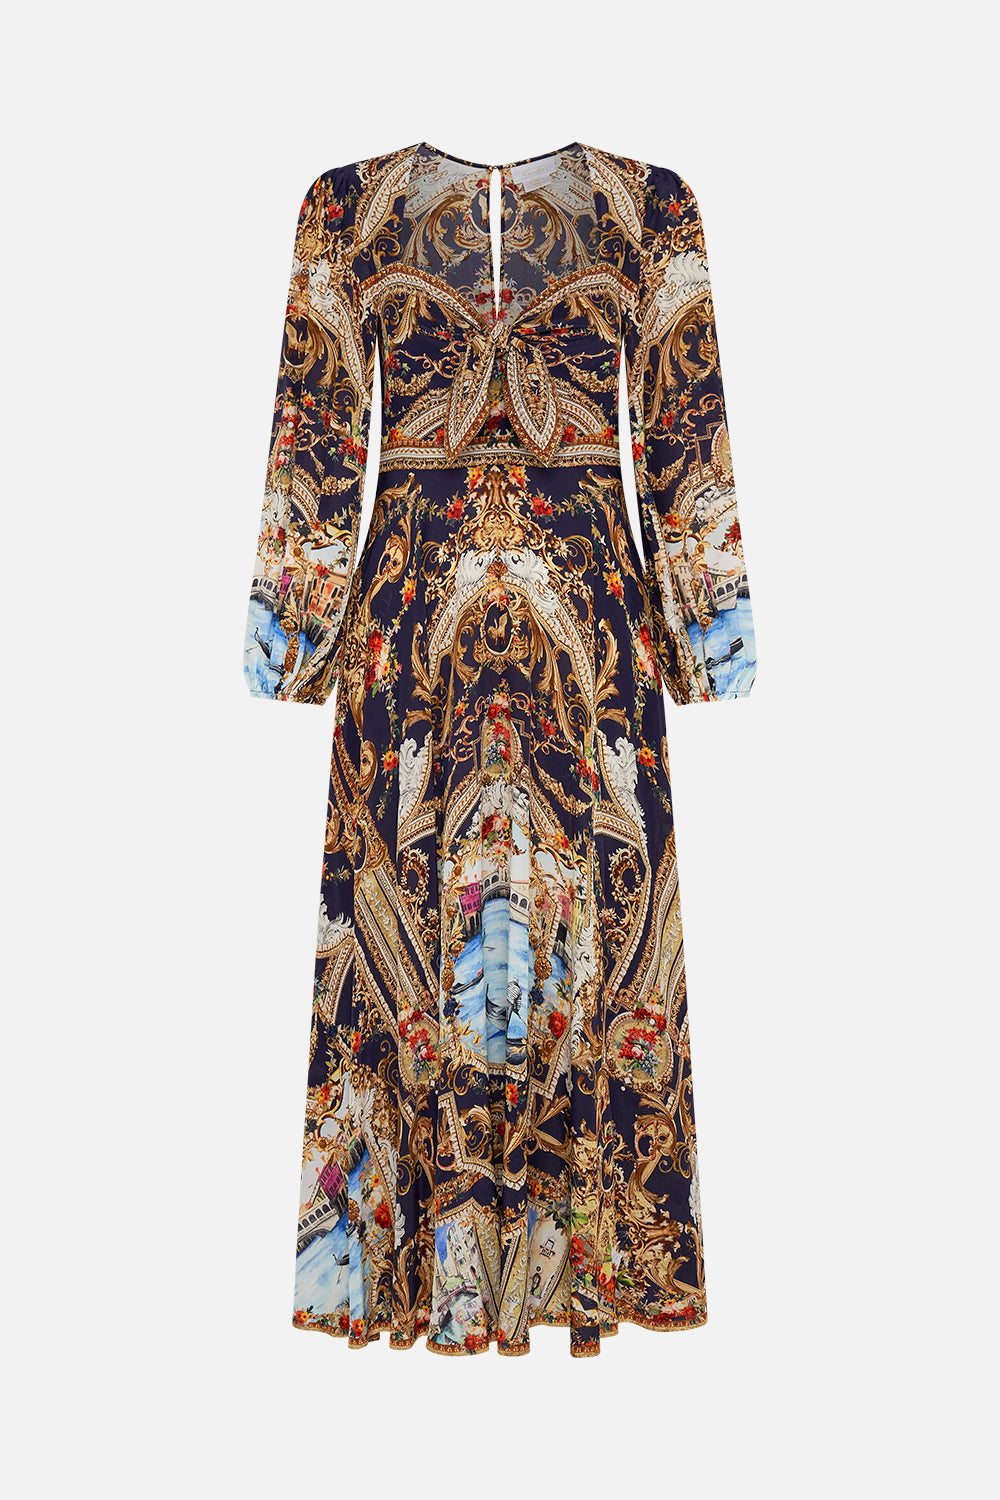 Product view of CAMILLA tie front dress in Venice Vignette print 